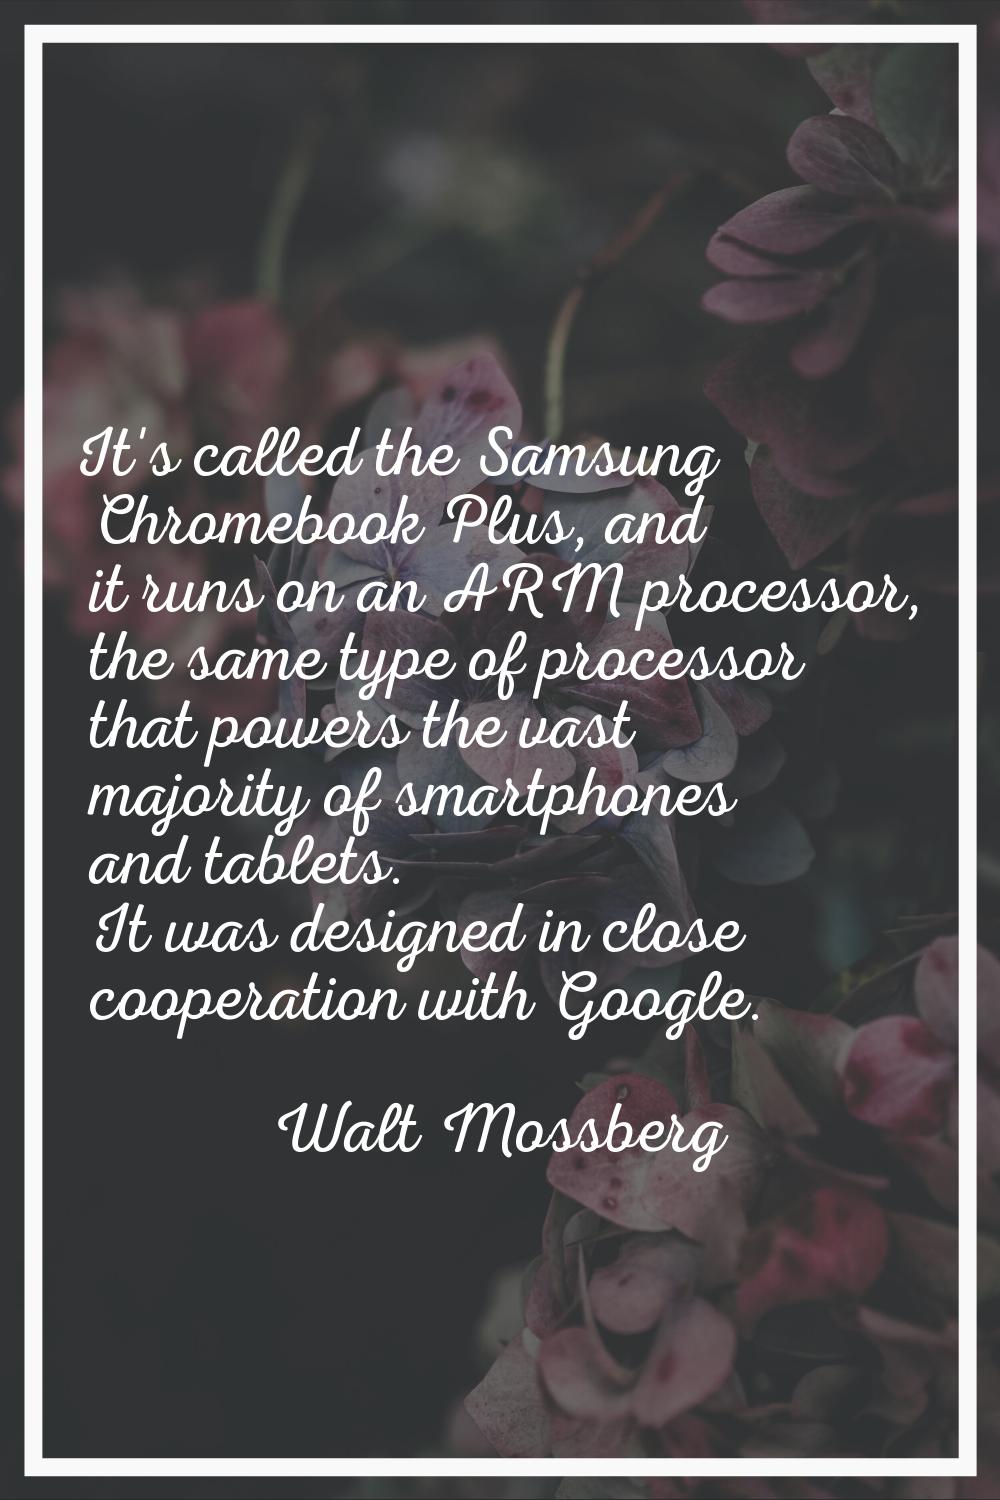 It's called the Samsung Chromebook Plus, and it runs on an ARM processor, the same type of processo